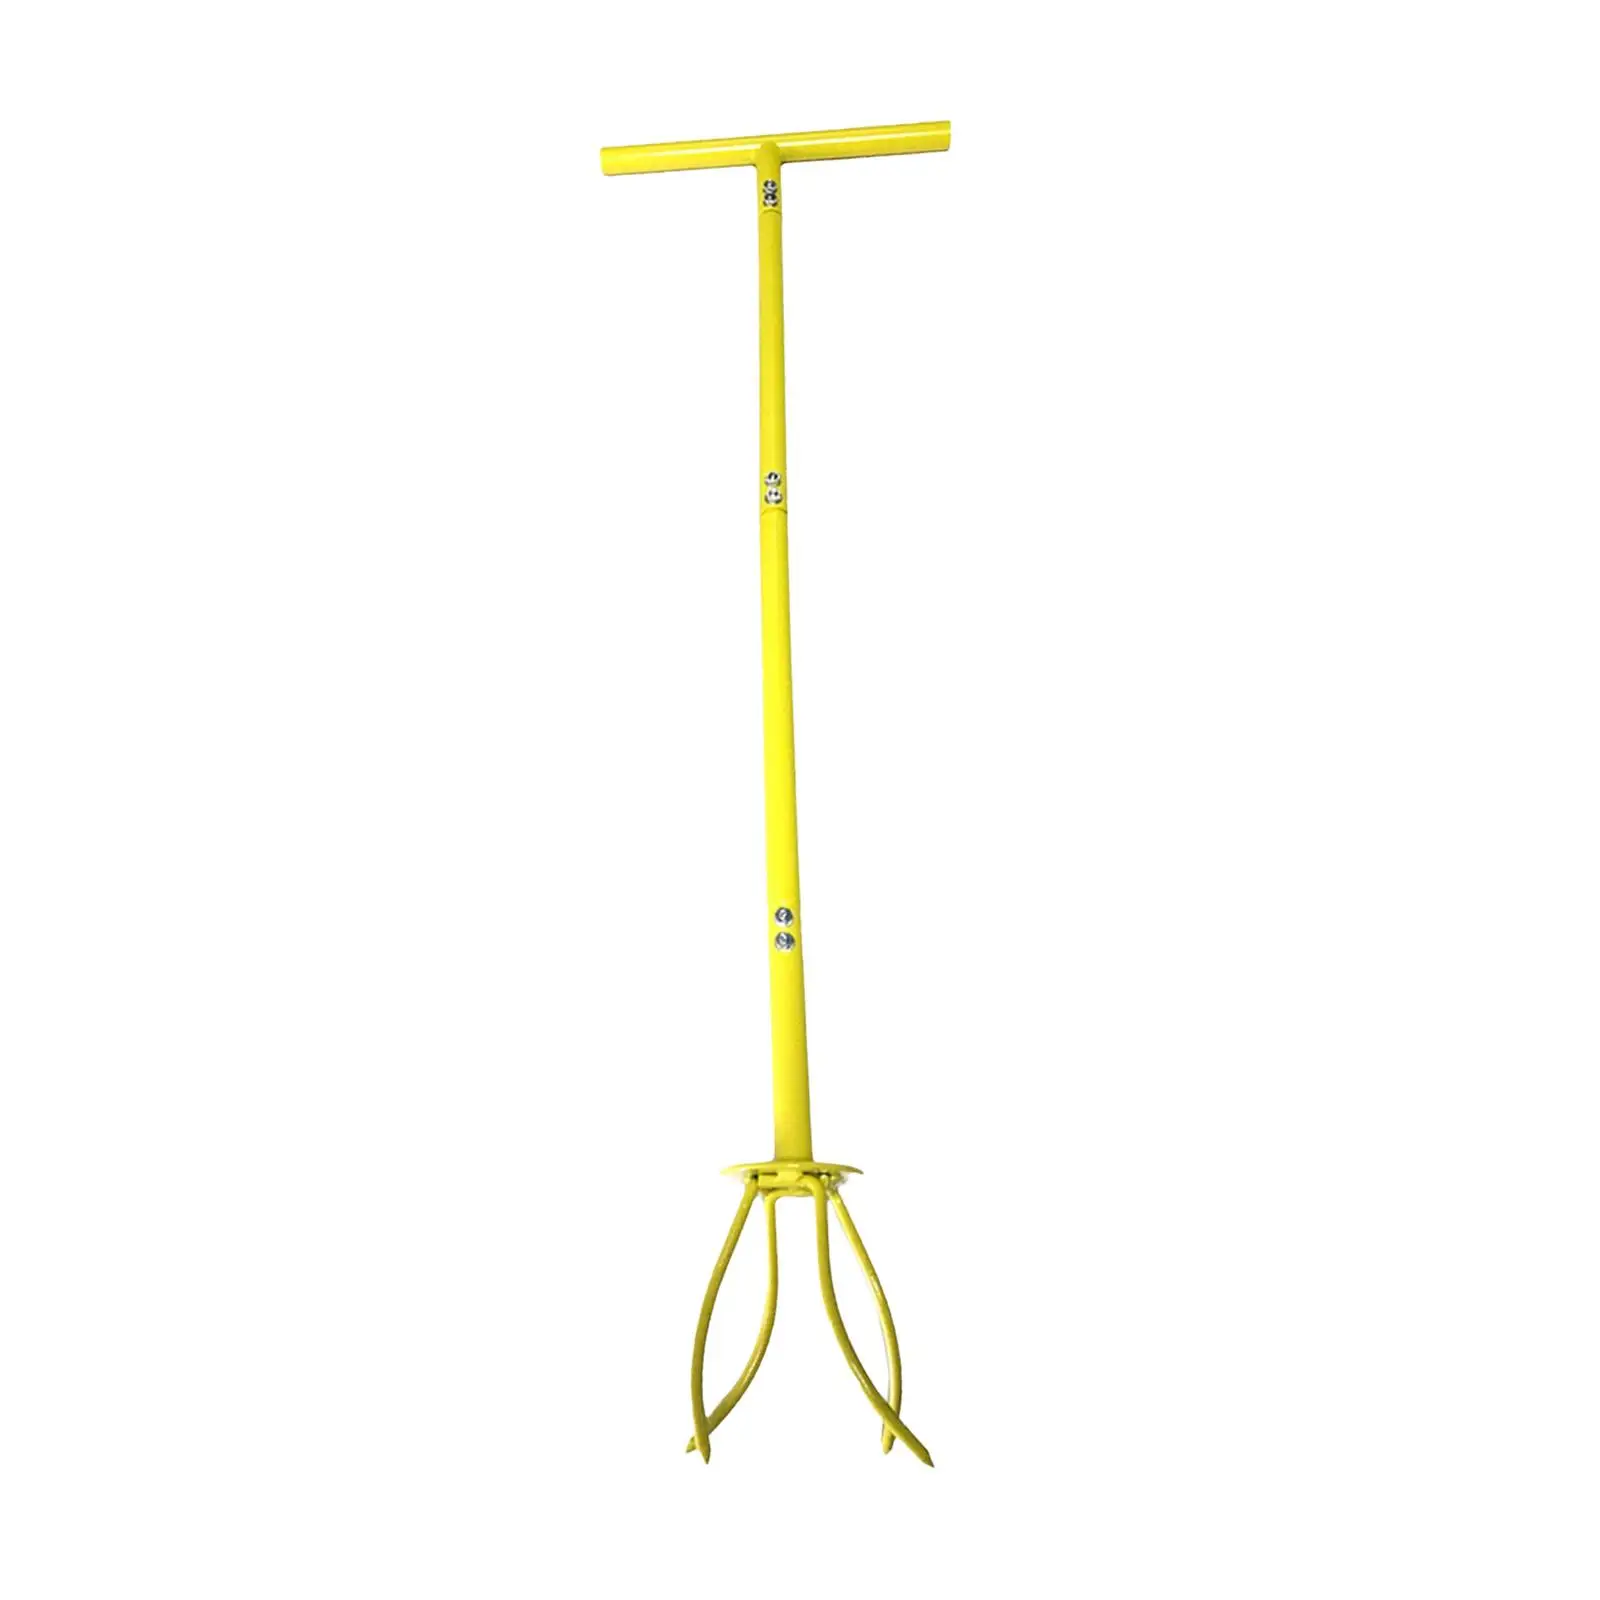 Manual Hand Tiller Strong for Cultivate, Loosen, Aerate T Shaped Handle Gardening Claw Tool Cultivator Agriculture Farmer Tool